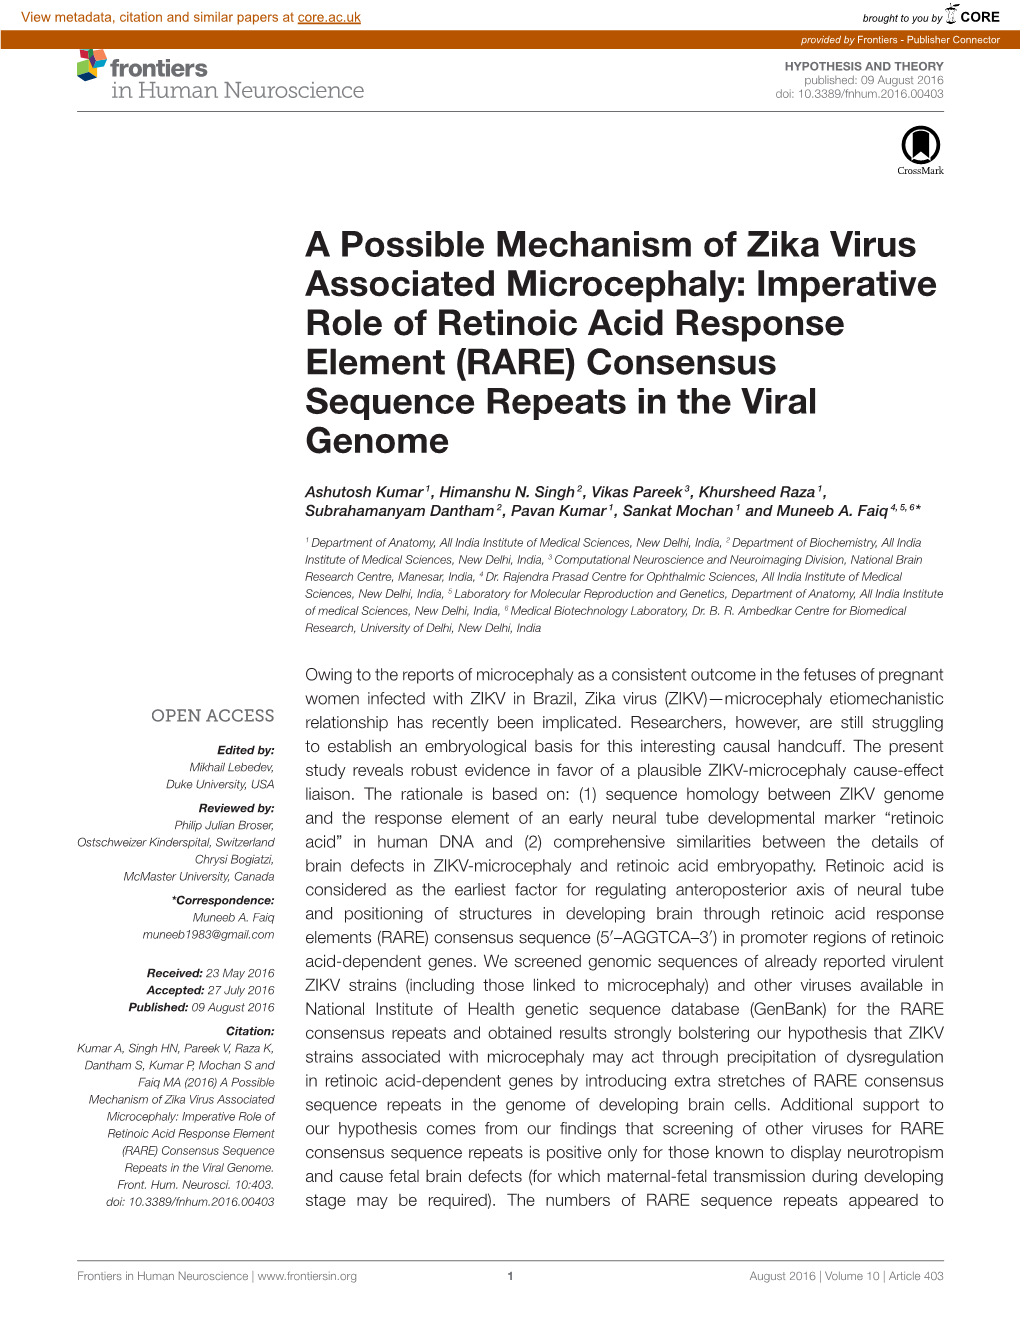 A Possible Mechanism of Zika Virus Associated Microcephaly: Imperative Role of Retinoic Acid Response Element (RARE) Consensus Sequence Repeats in the Viral Genome